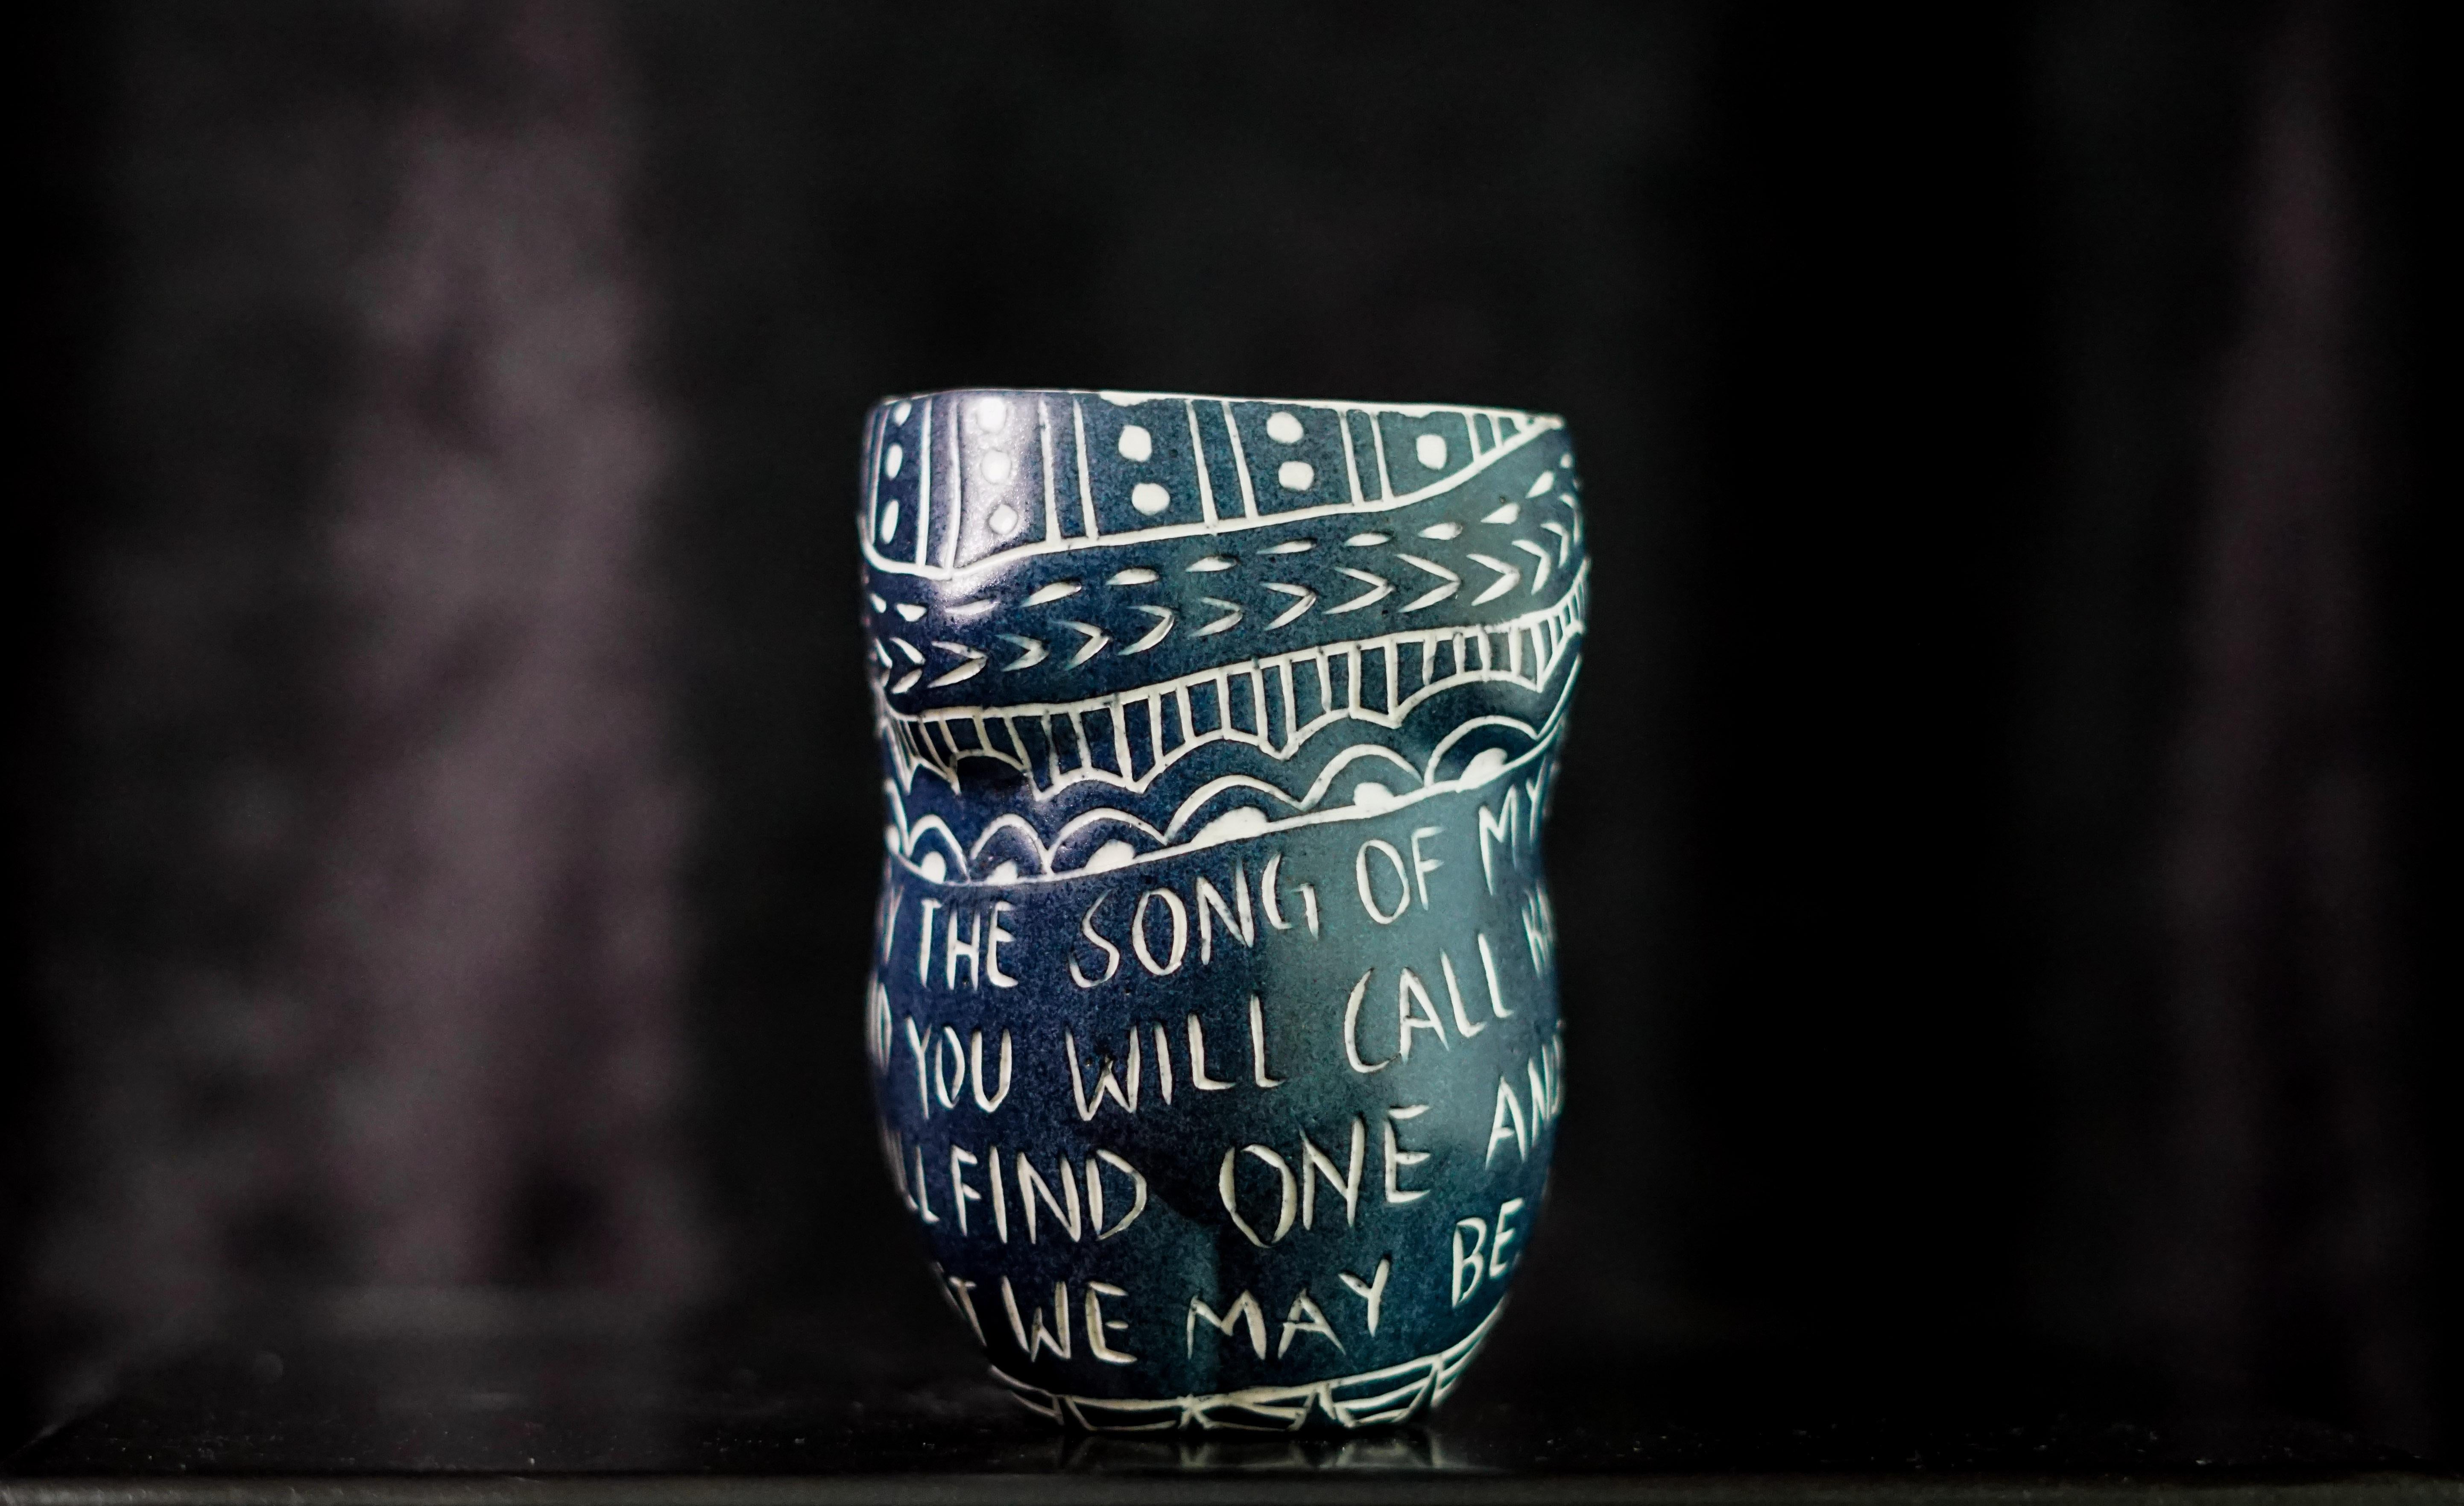 “Carry the Song..”, 2019
From the series Fragments of Our Love Story
Porcelain cup with sgraffito detailing
5 x 3 x 3 inches.

“Carry the song..” Carry the song of my breath to your chest. And you will call me back. And like this we will find one